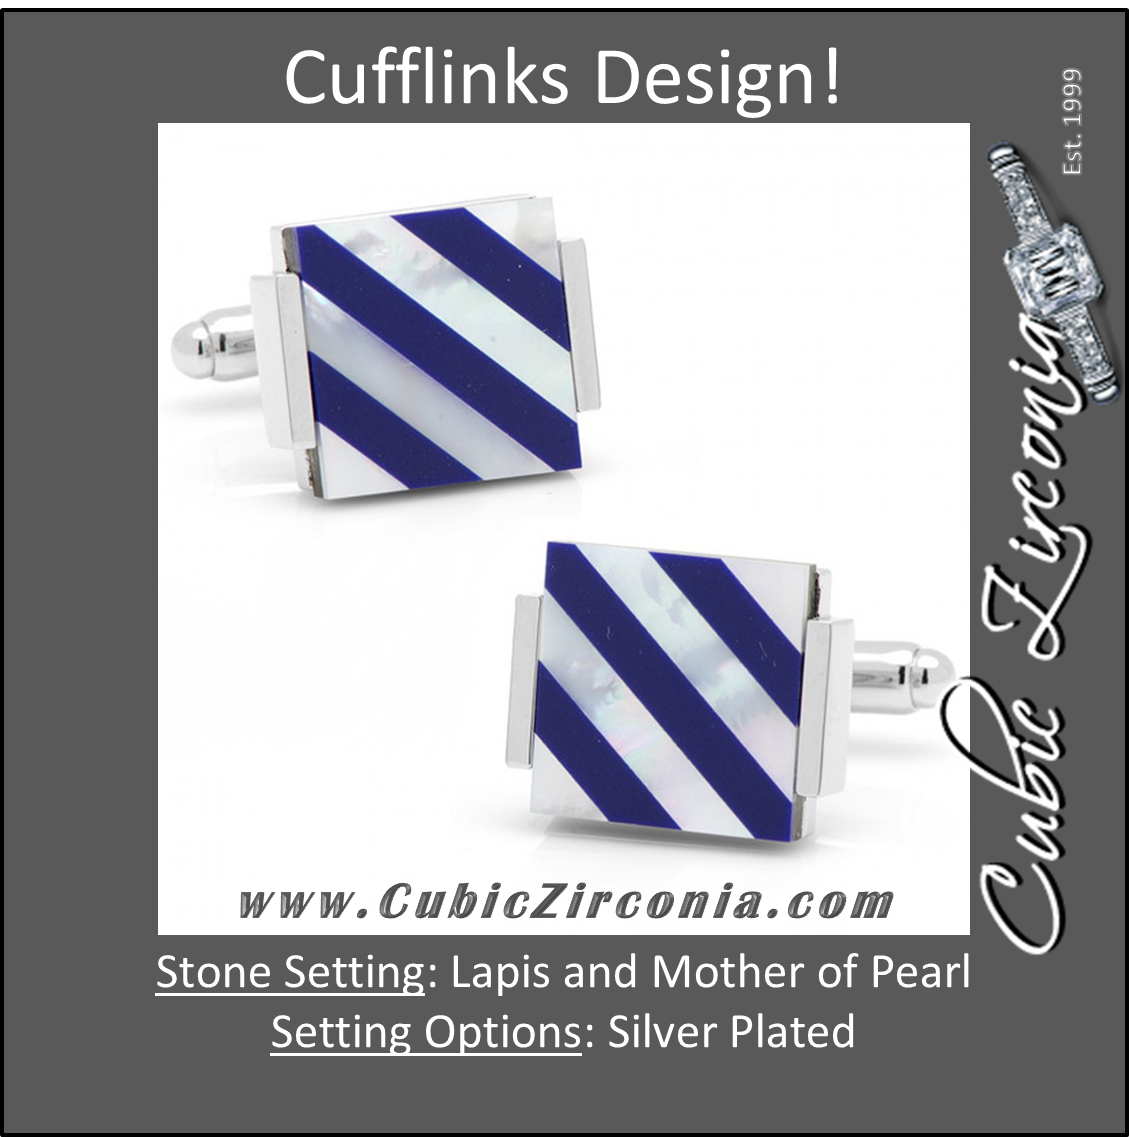 Men’s Cufflinks- Floating Lapis and Mother of Pearl with Stripes